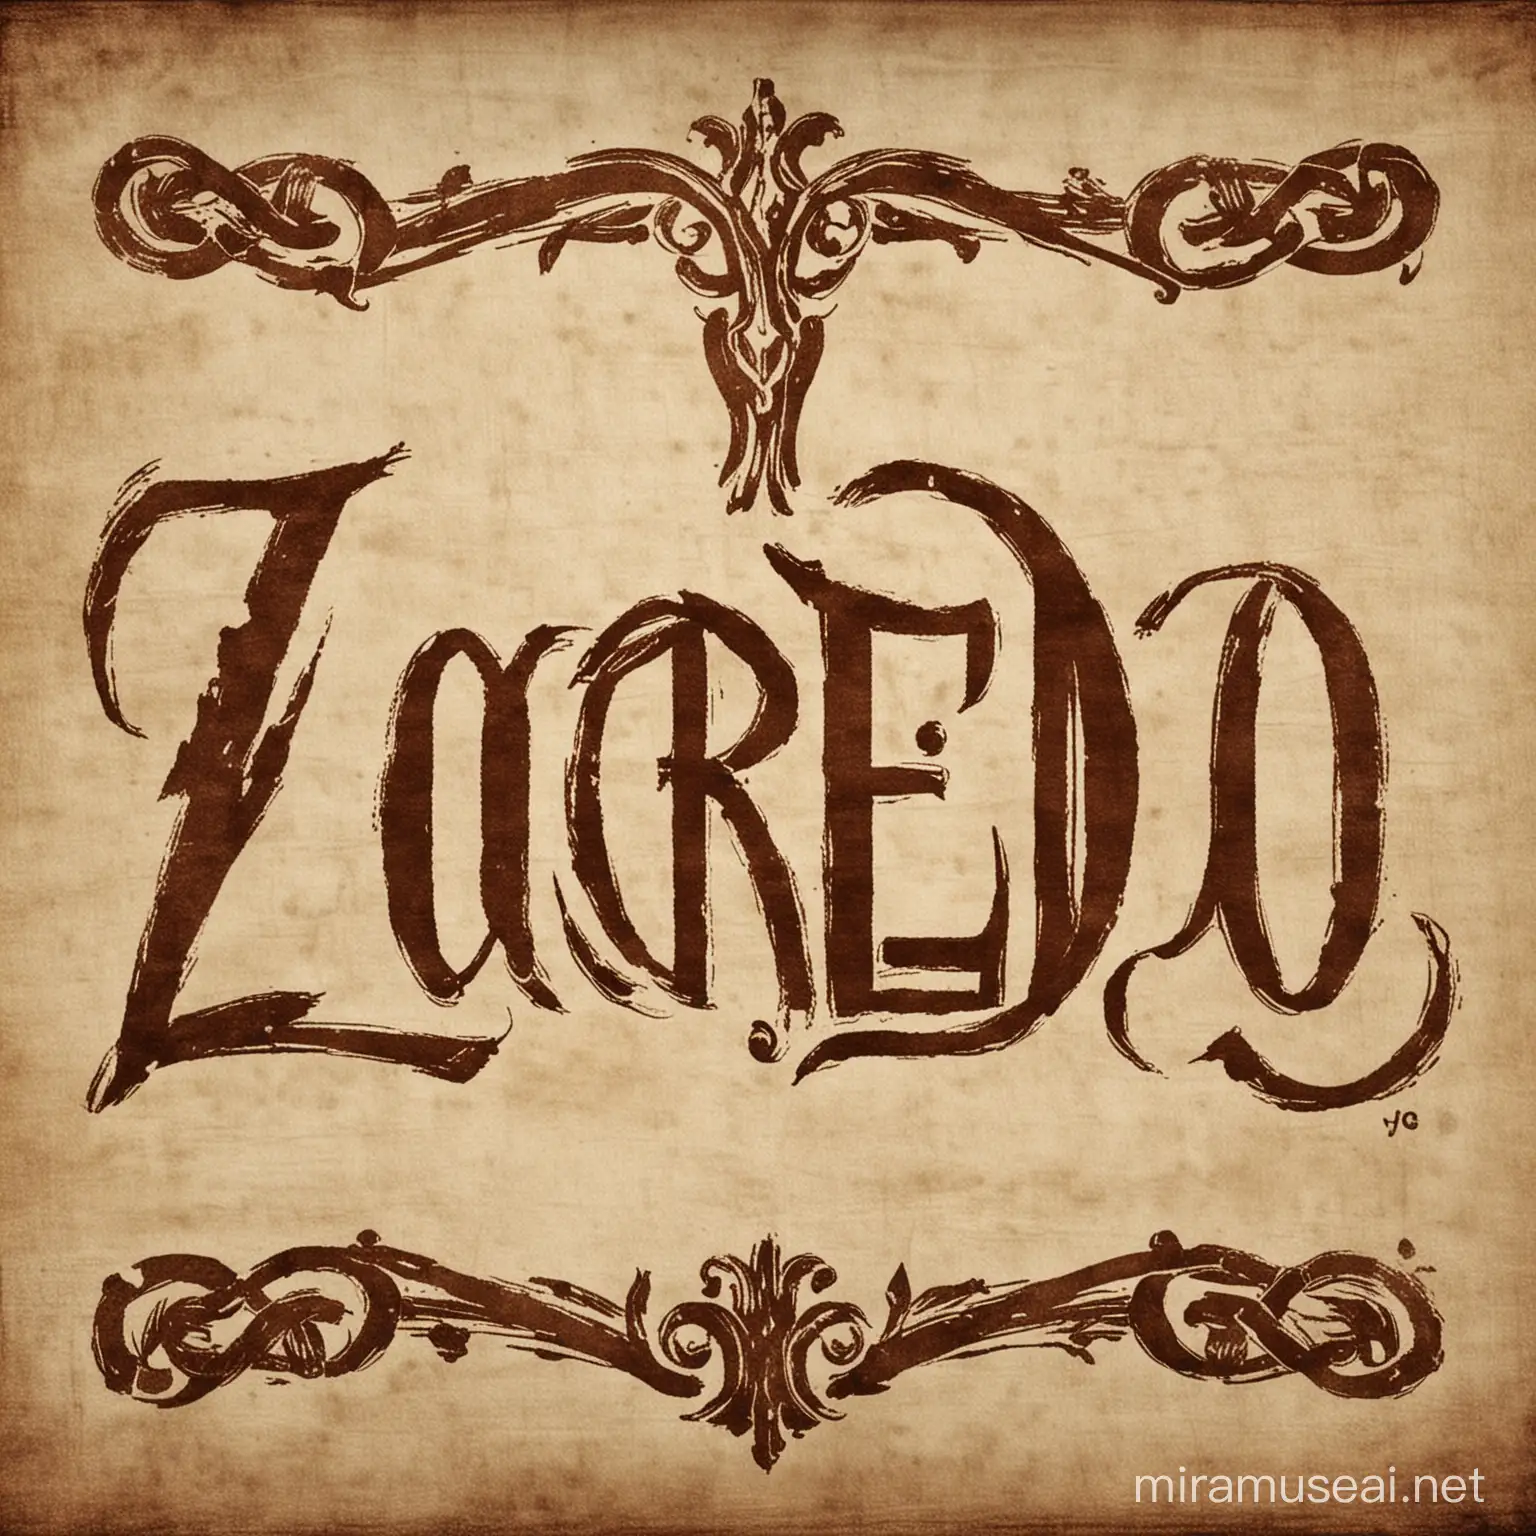 Zocredo. Type exactly this in most ancient style with no character for youtube db